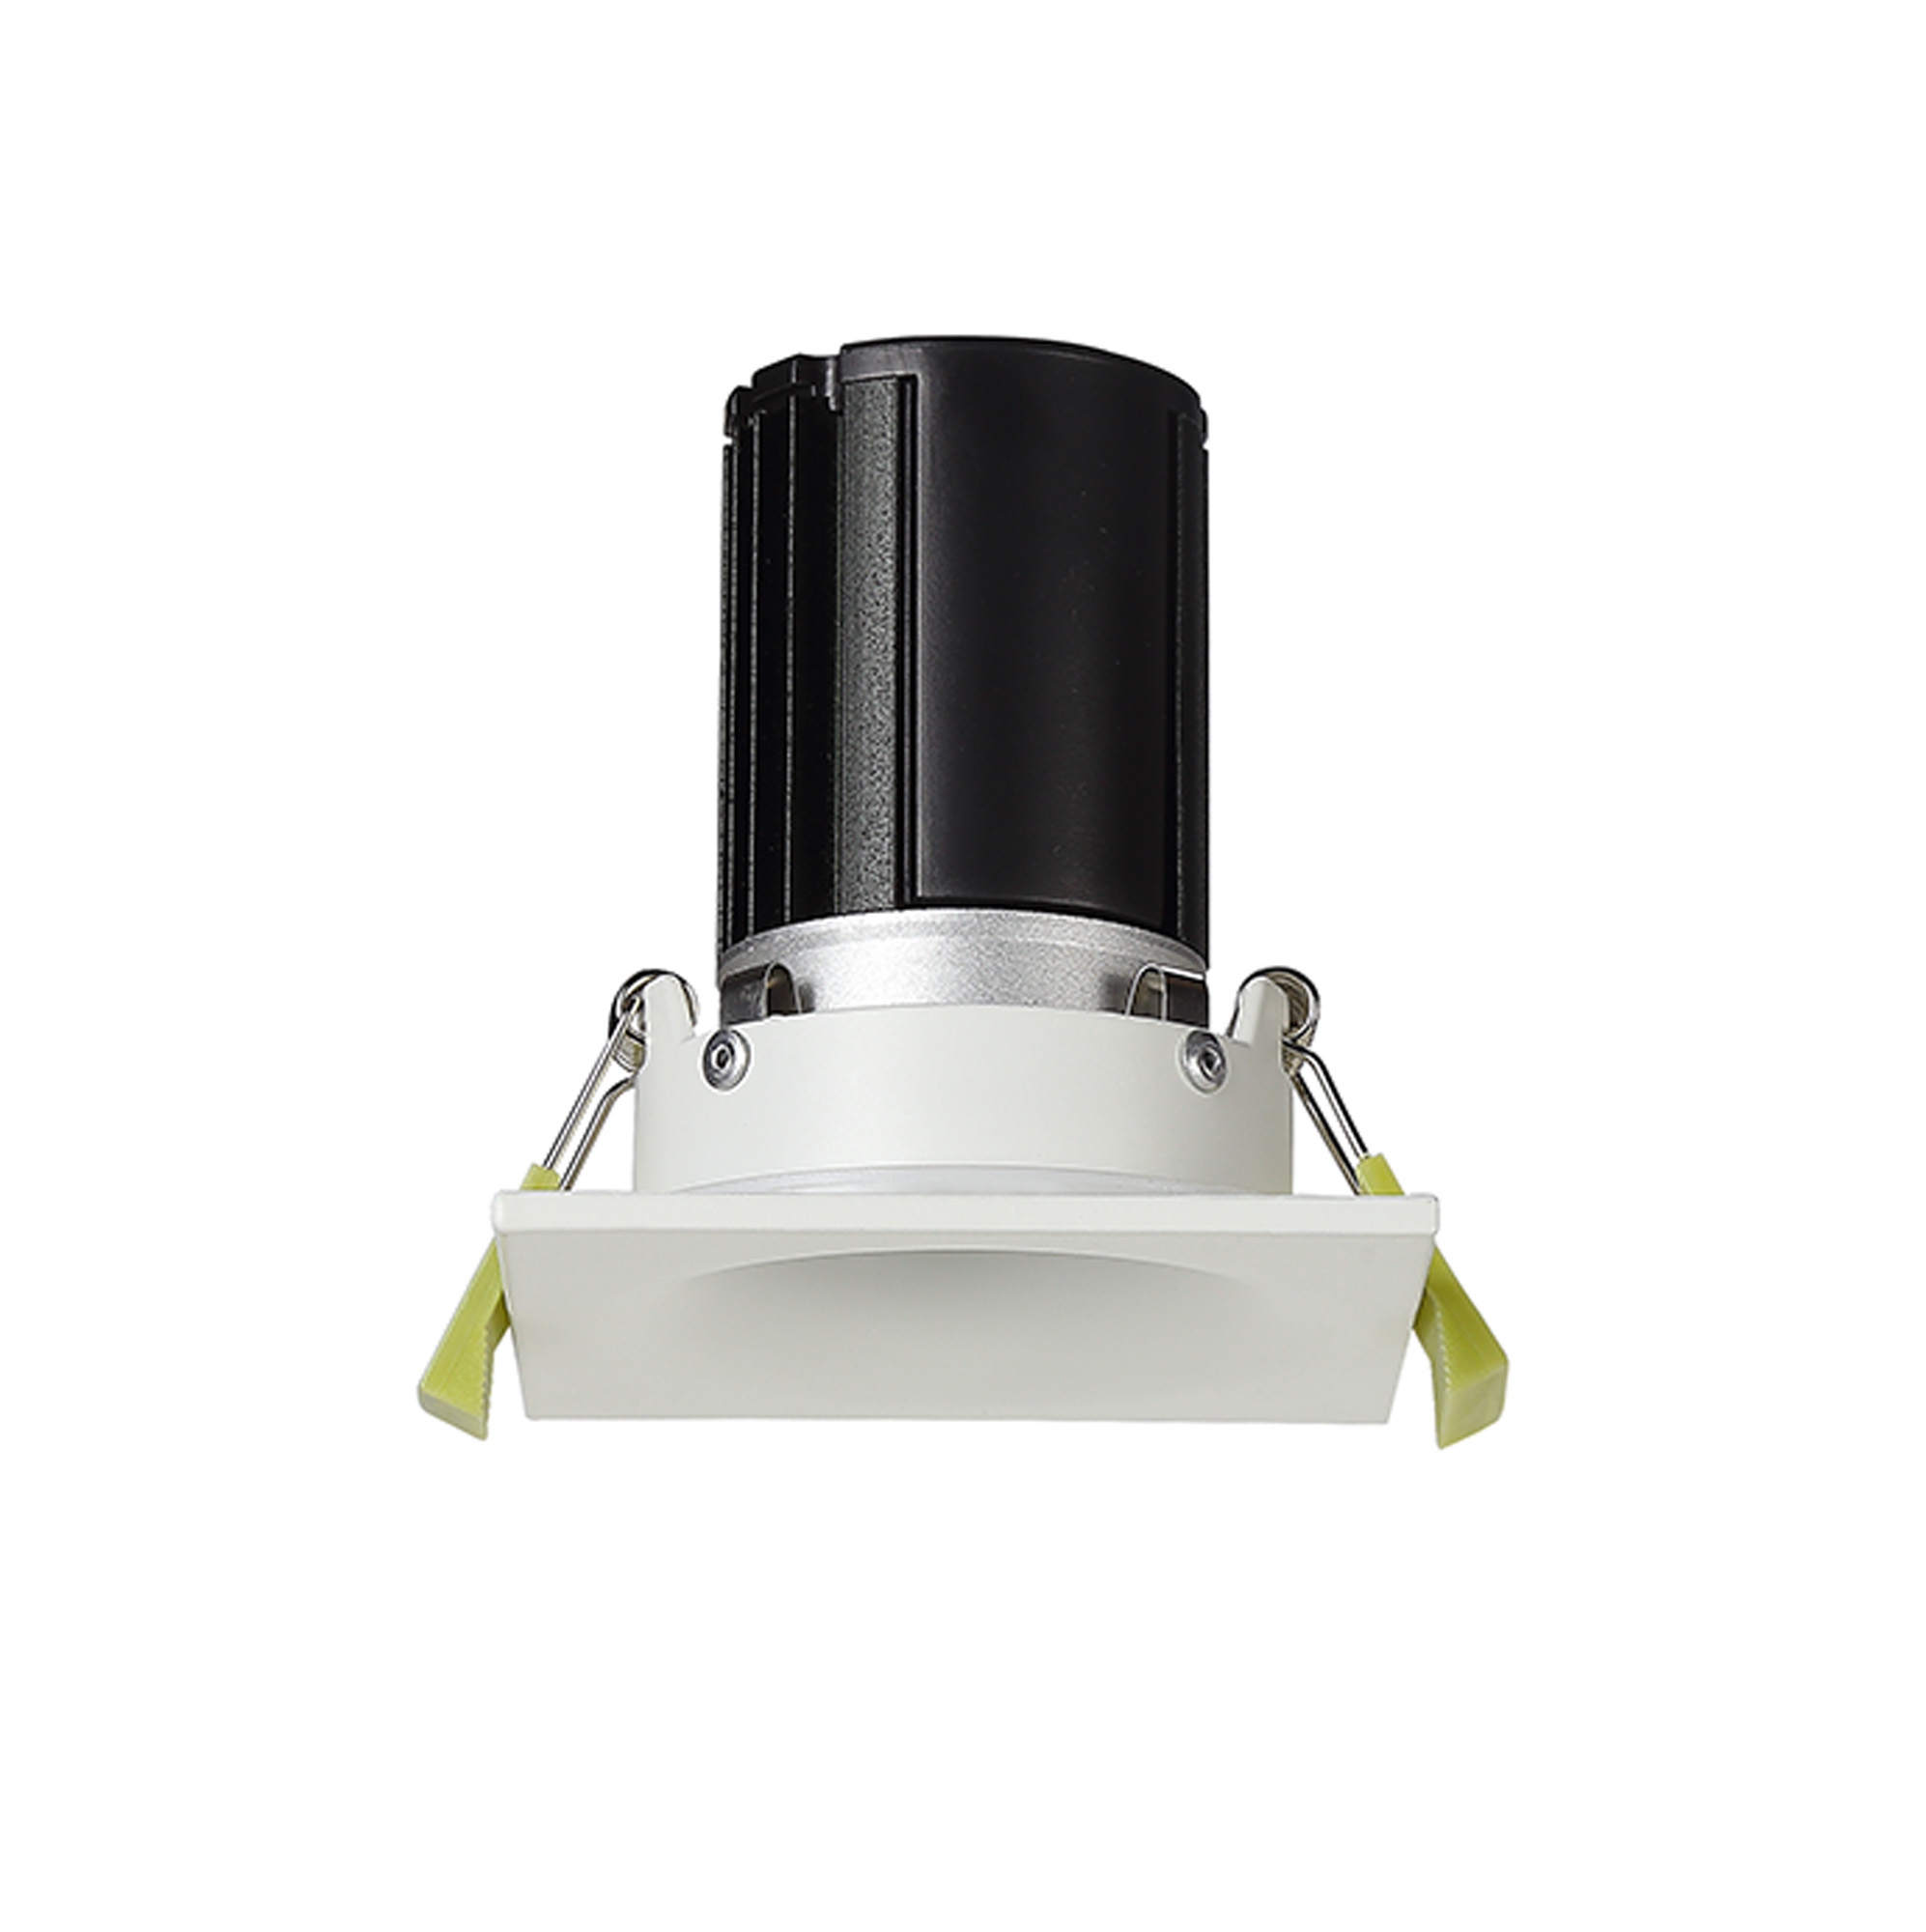 DM202499  Bruve 12 Tridonic powered 12W 3000K 1200lm 36° LED Engine,300mA , CRI>90 LED Engine Matt White Fixed Square Recessed Downlight, Inner Glass cover, IP65